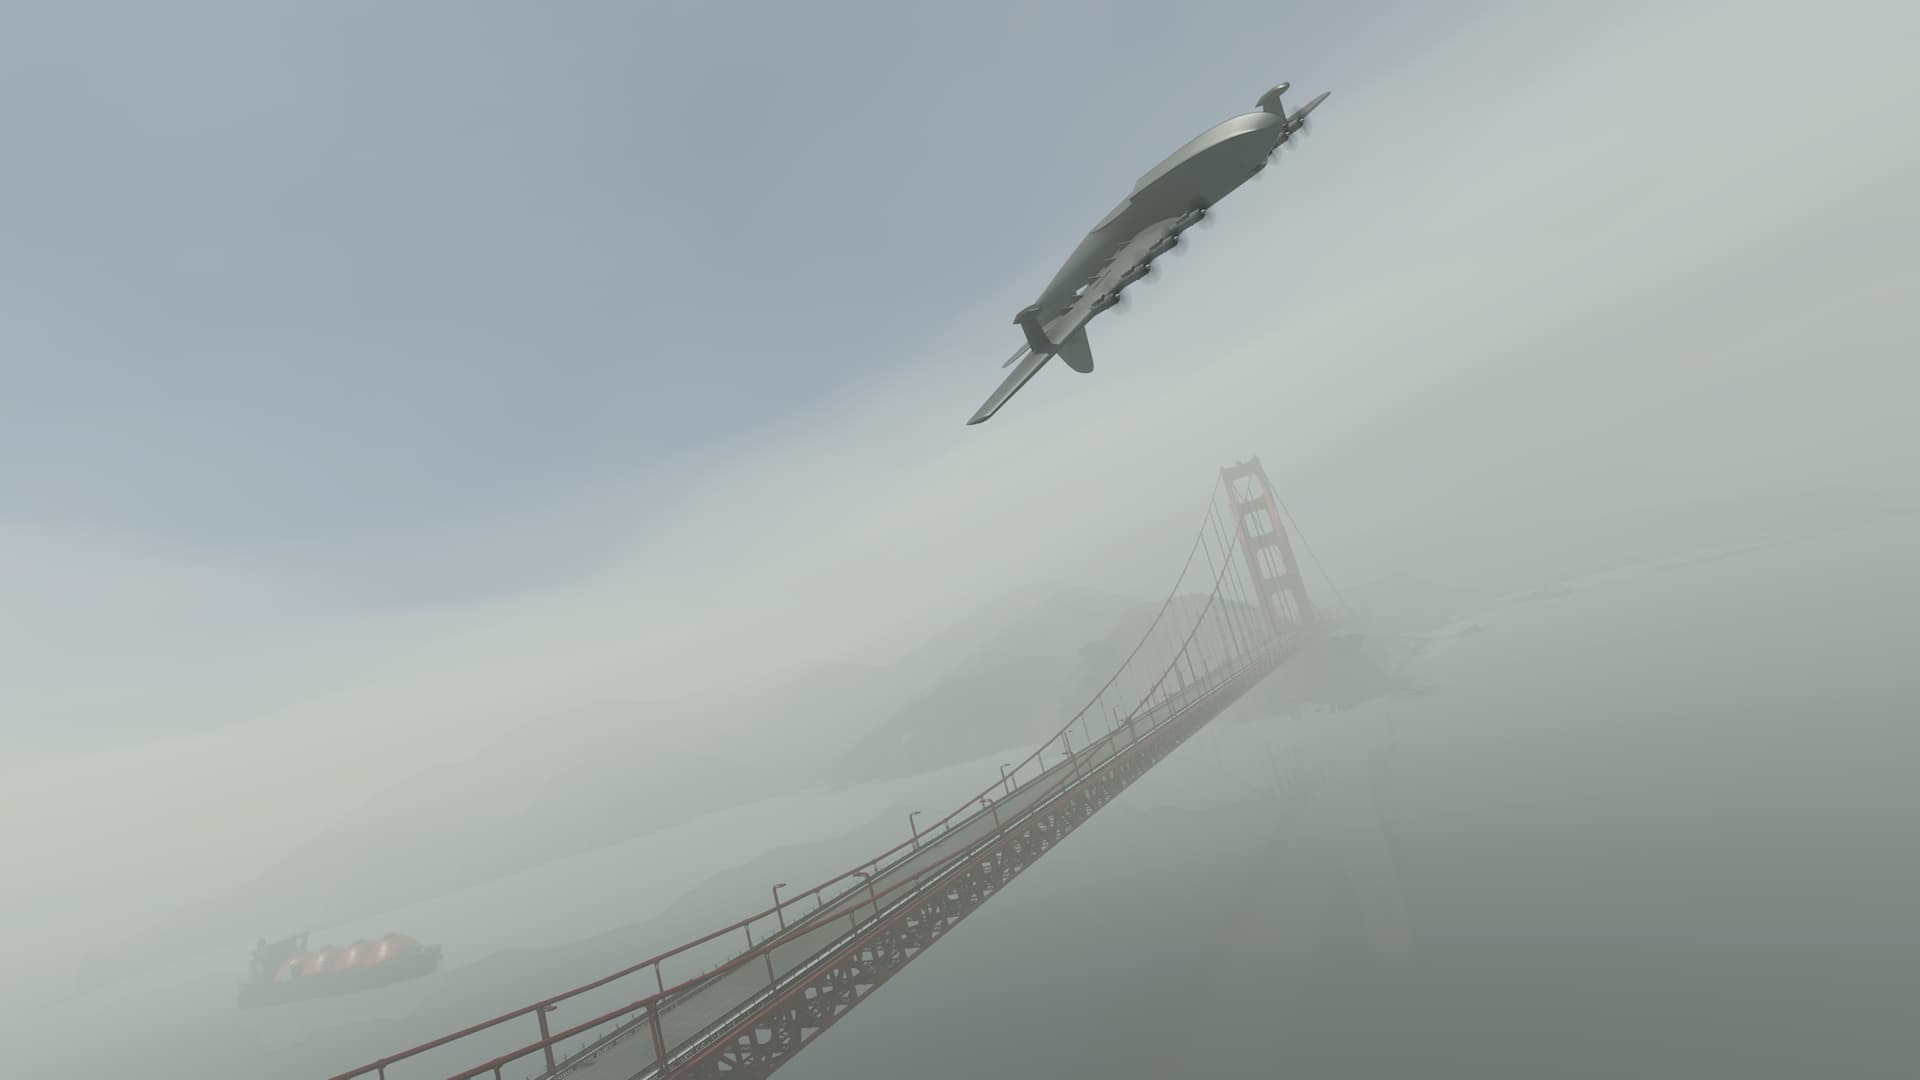 An H-4 Hercules Spruce Goose rolls inverted over the top of a foggy Golden Gate Bridge in San Fransisco.